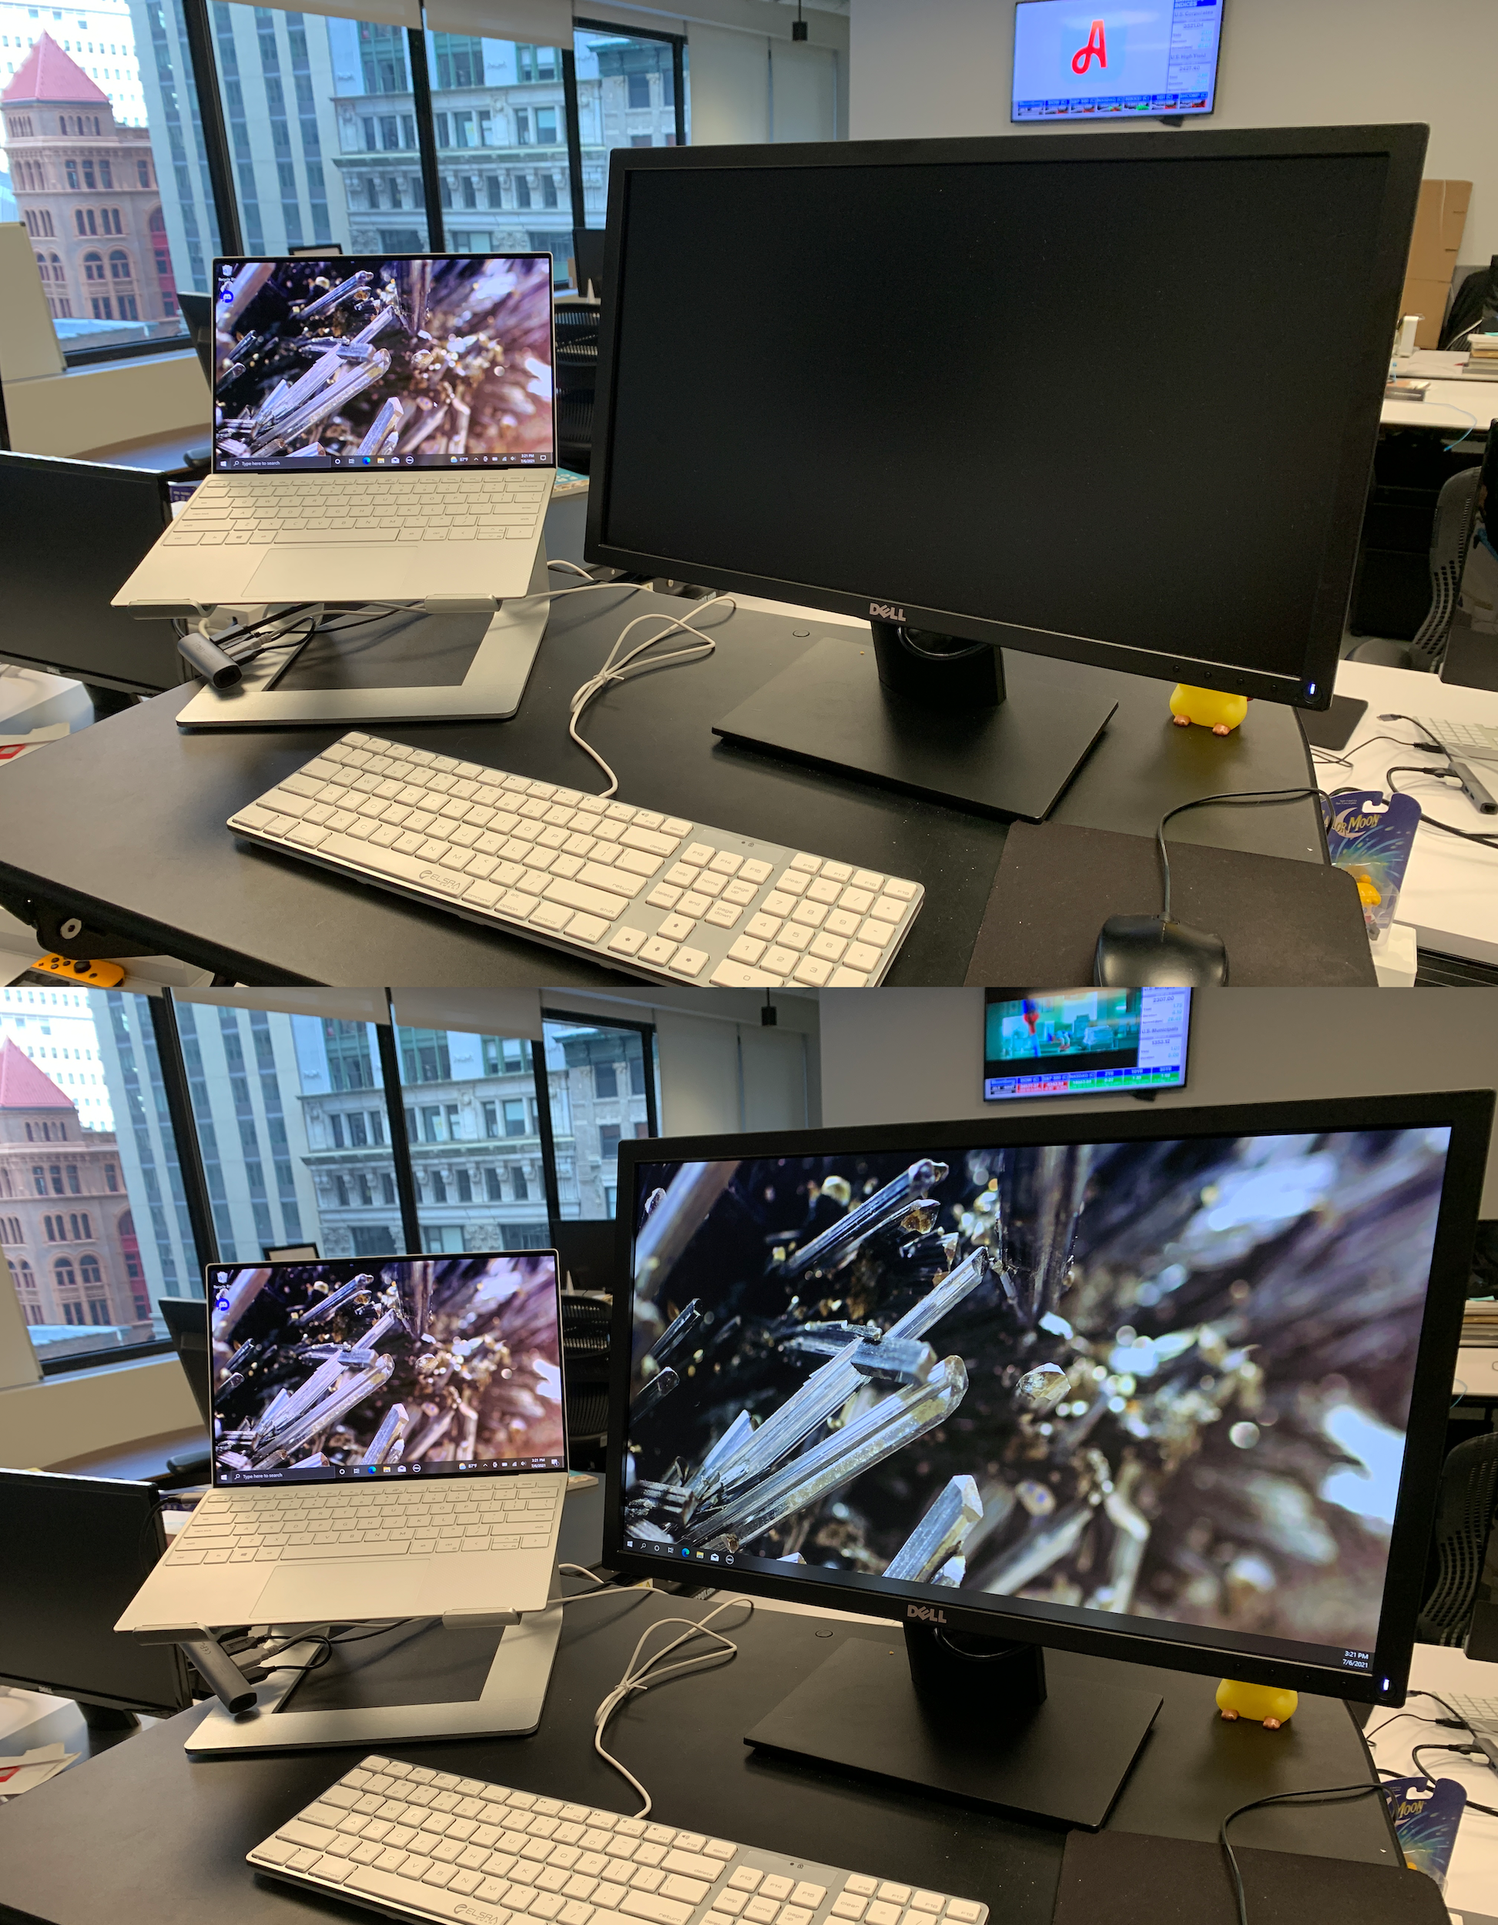 Two pictures on top of each other. The top picture shows a Windows laptop next to a black screened monitor. The bottom image shows the same Windows laptop, but its screen has now been extended onto the monitor.